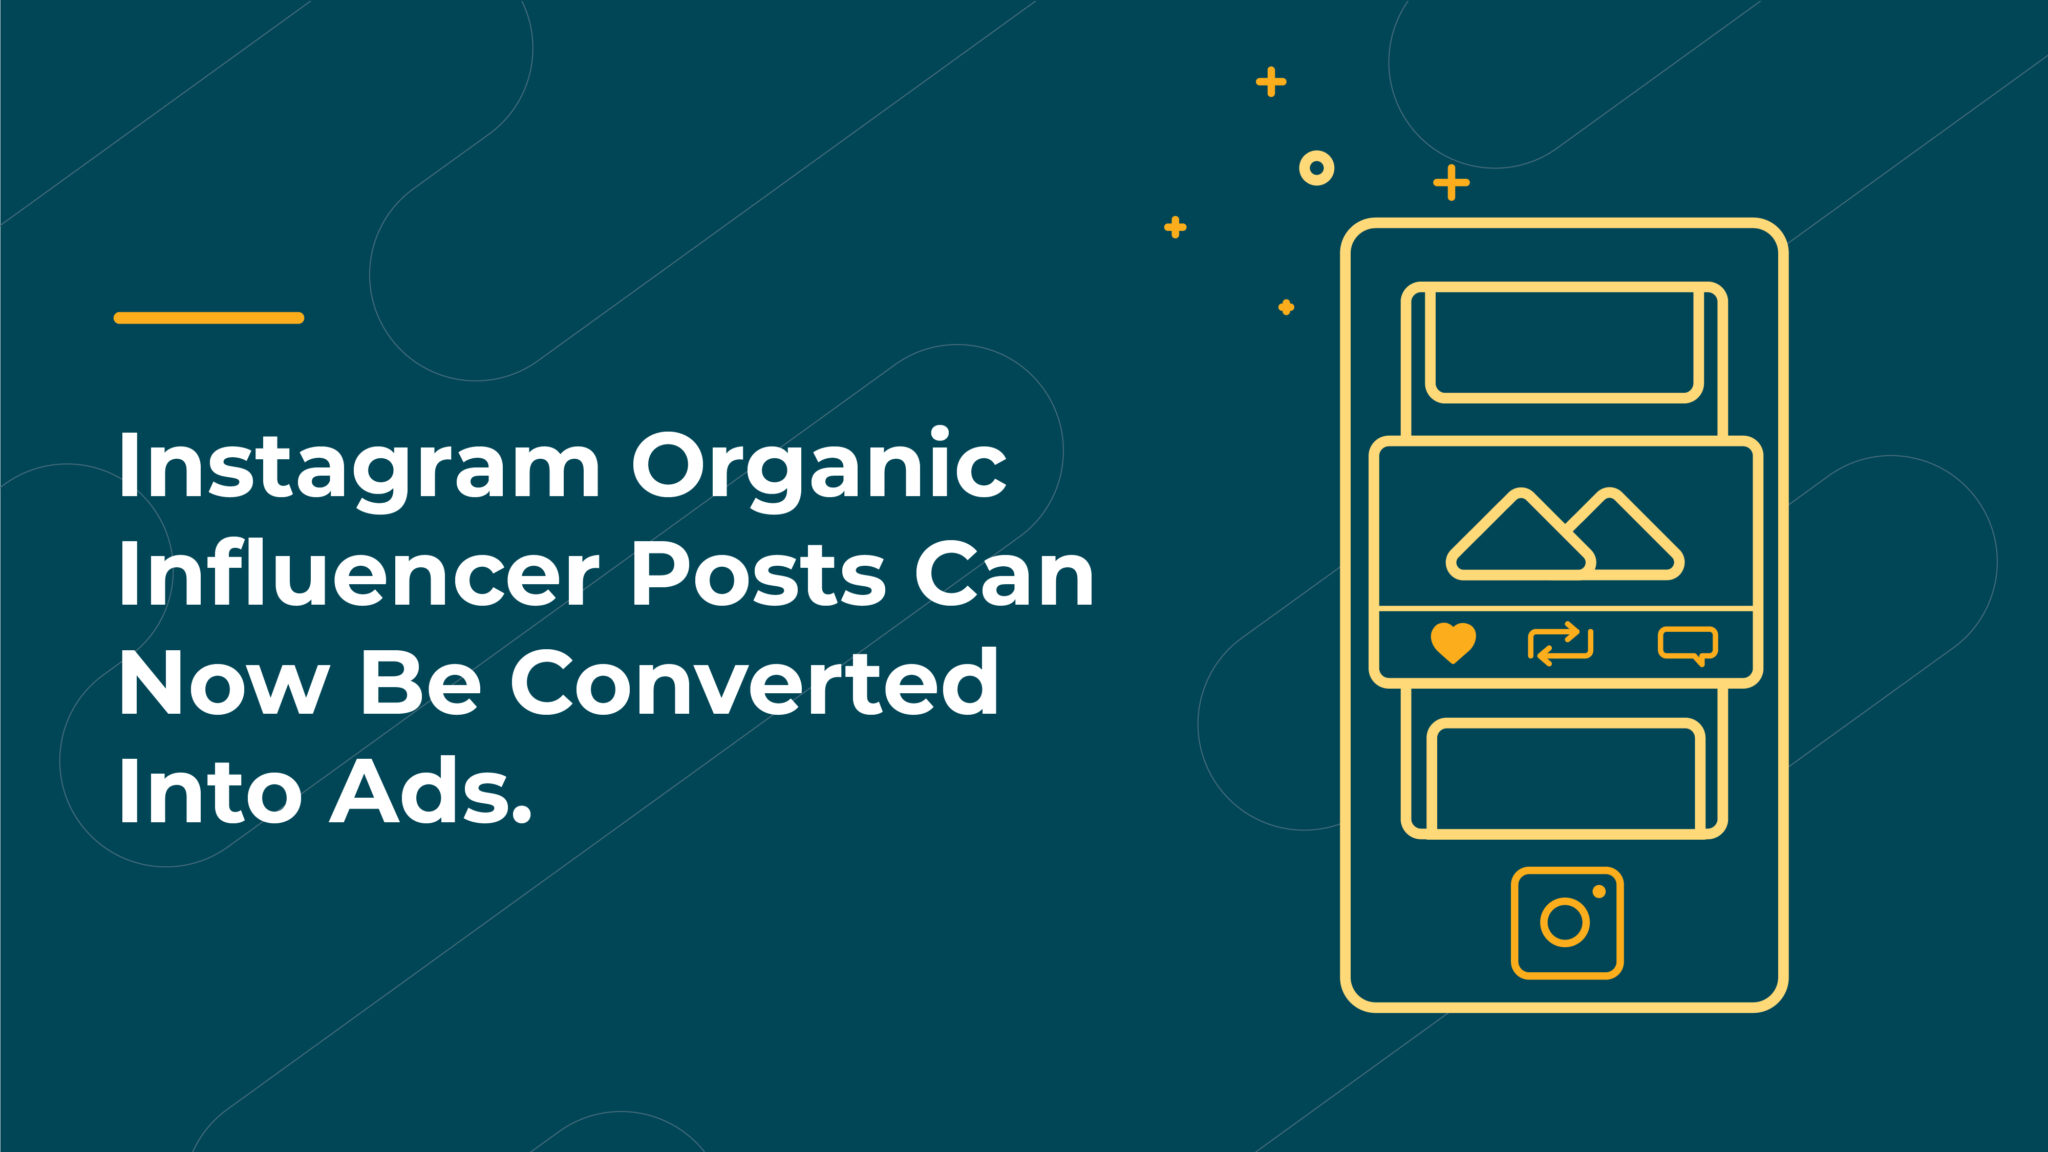 Instagram Organic Influencer Posts Can Now Be Converted Into Ads